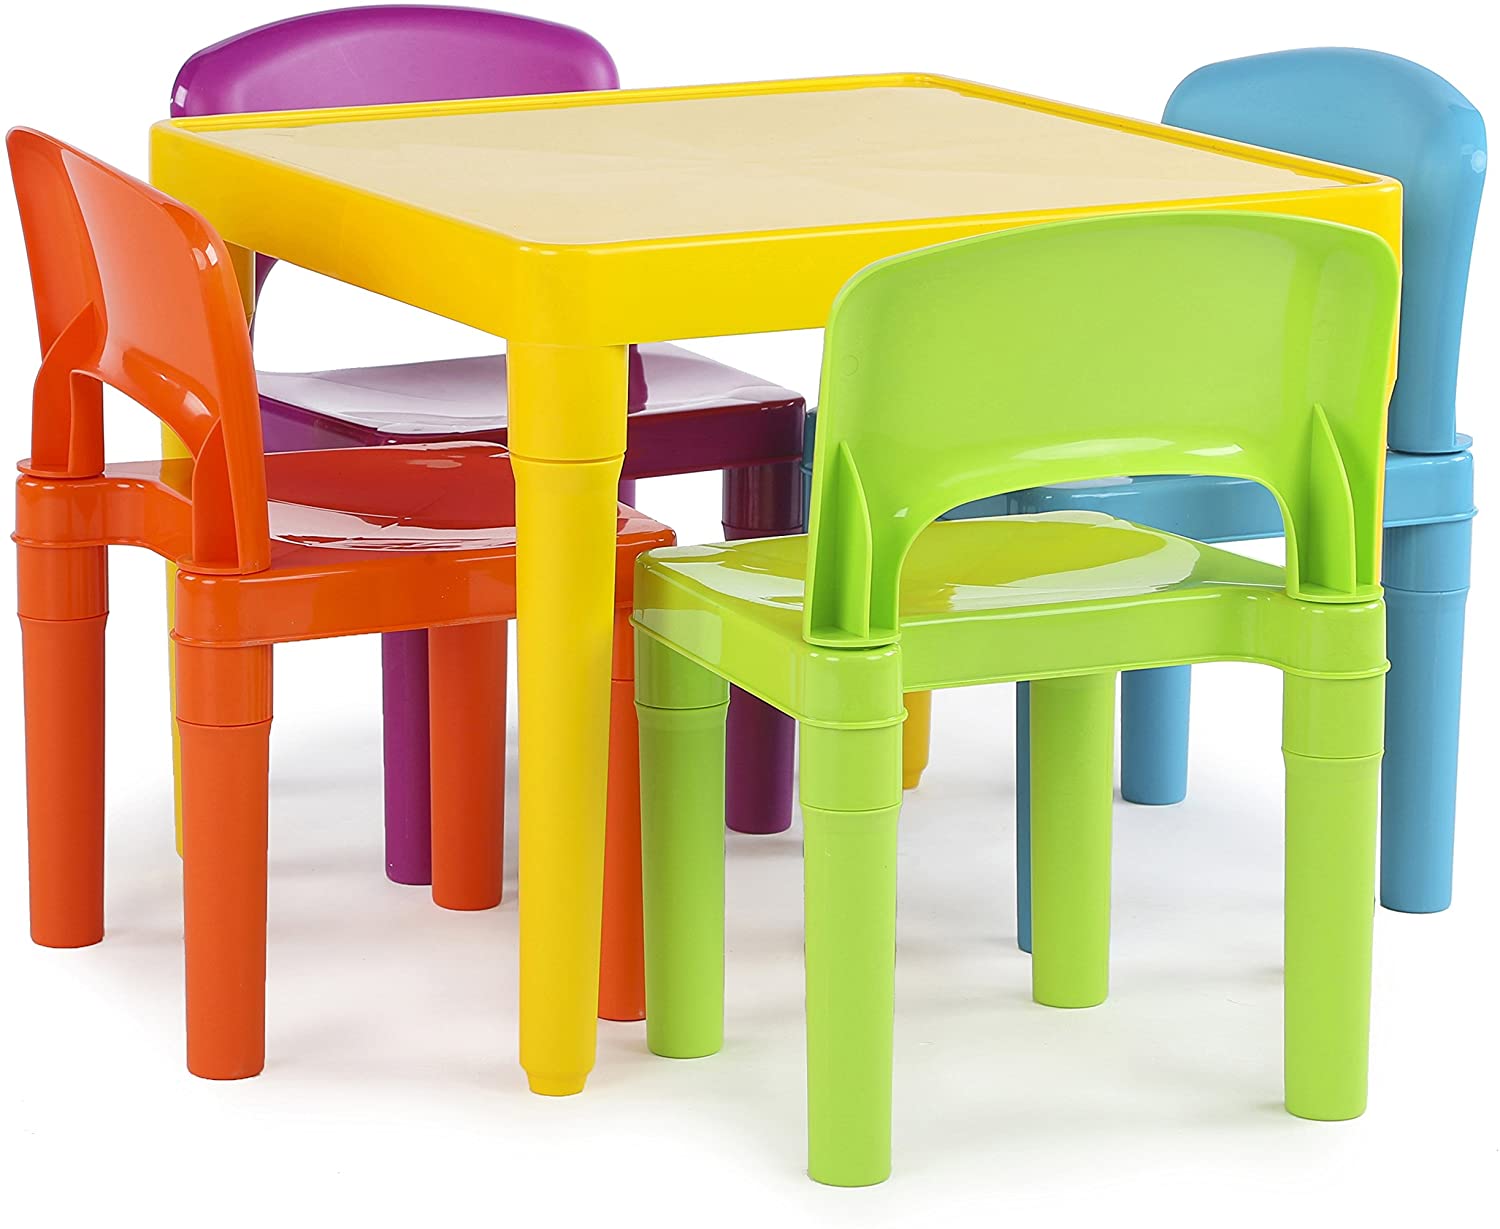 Humble Crew Snap-Together Plastic Kid’s Outdoor Table & Chairs